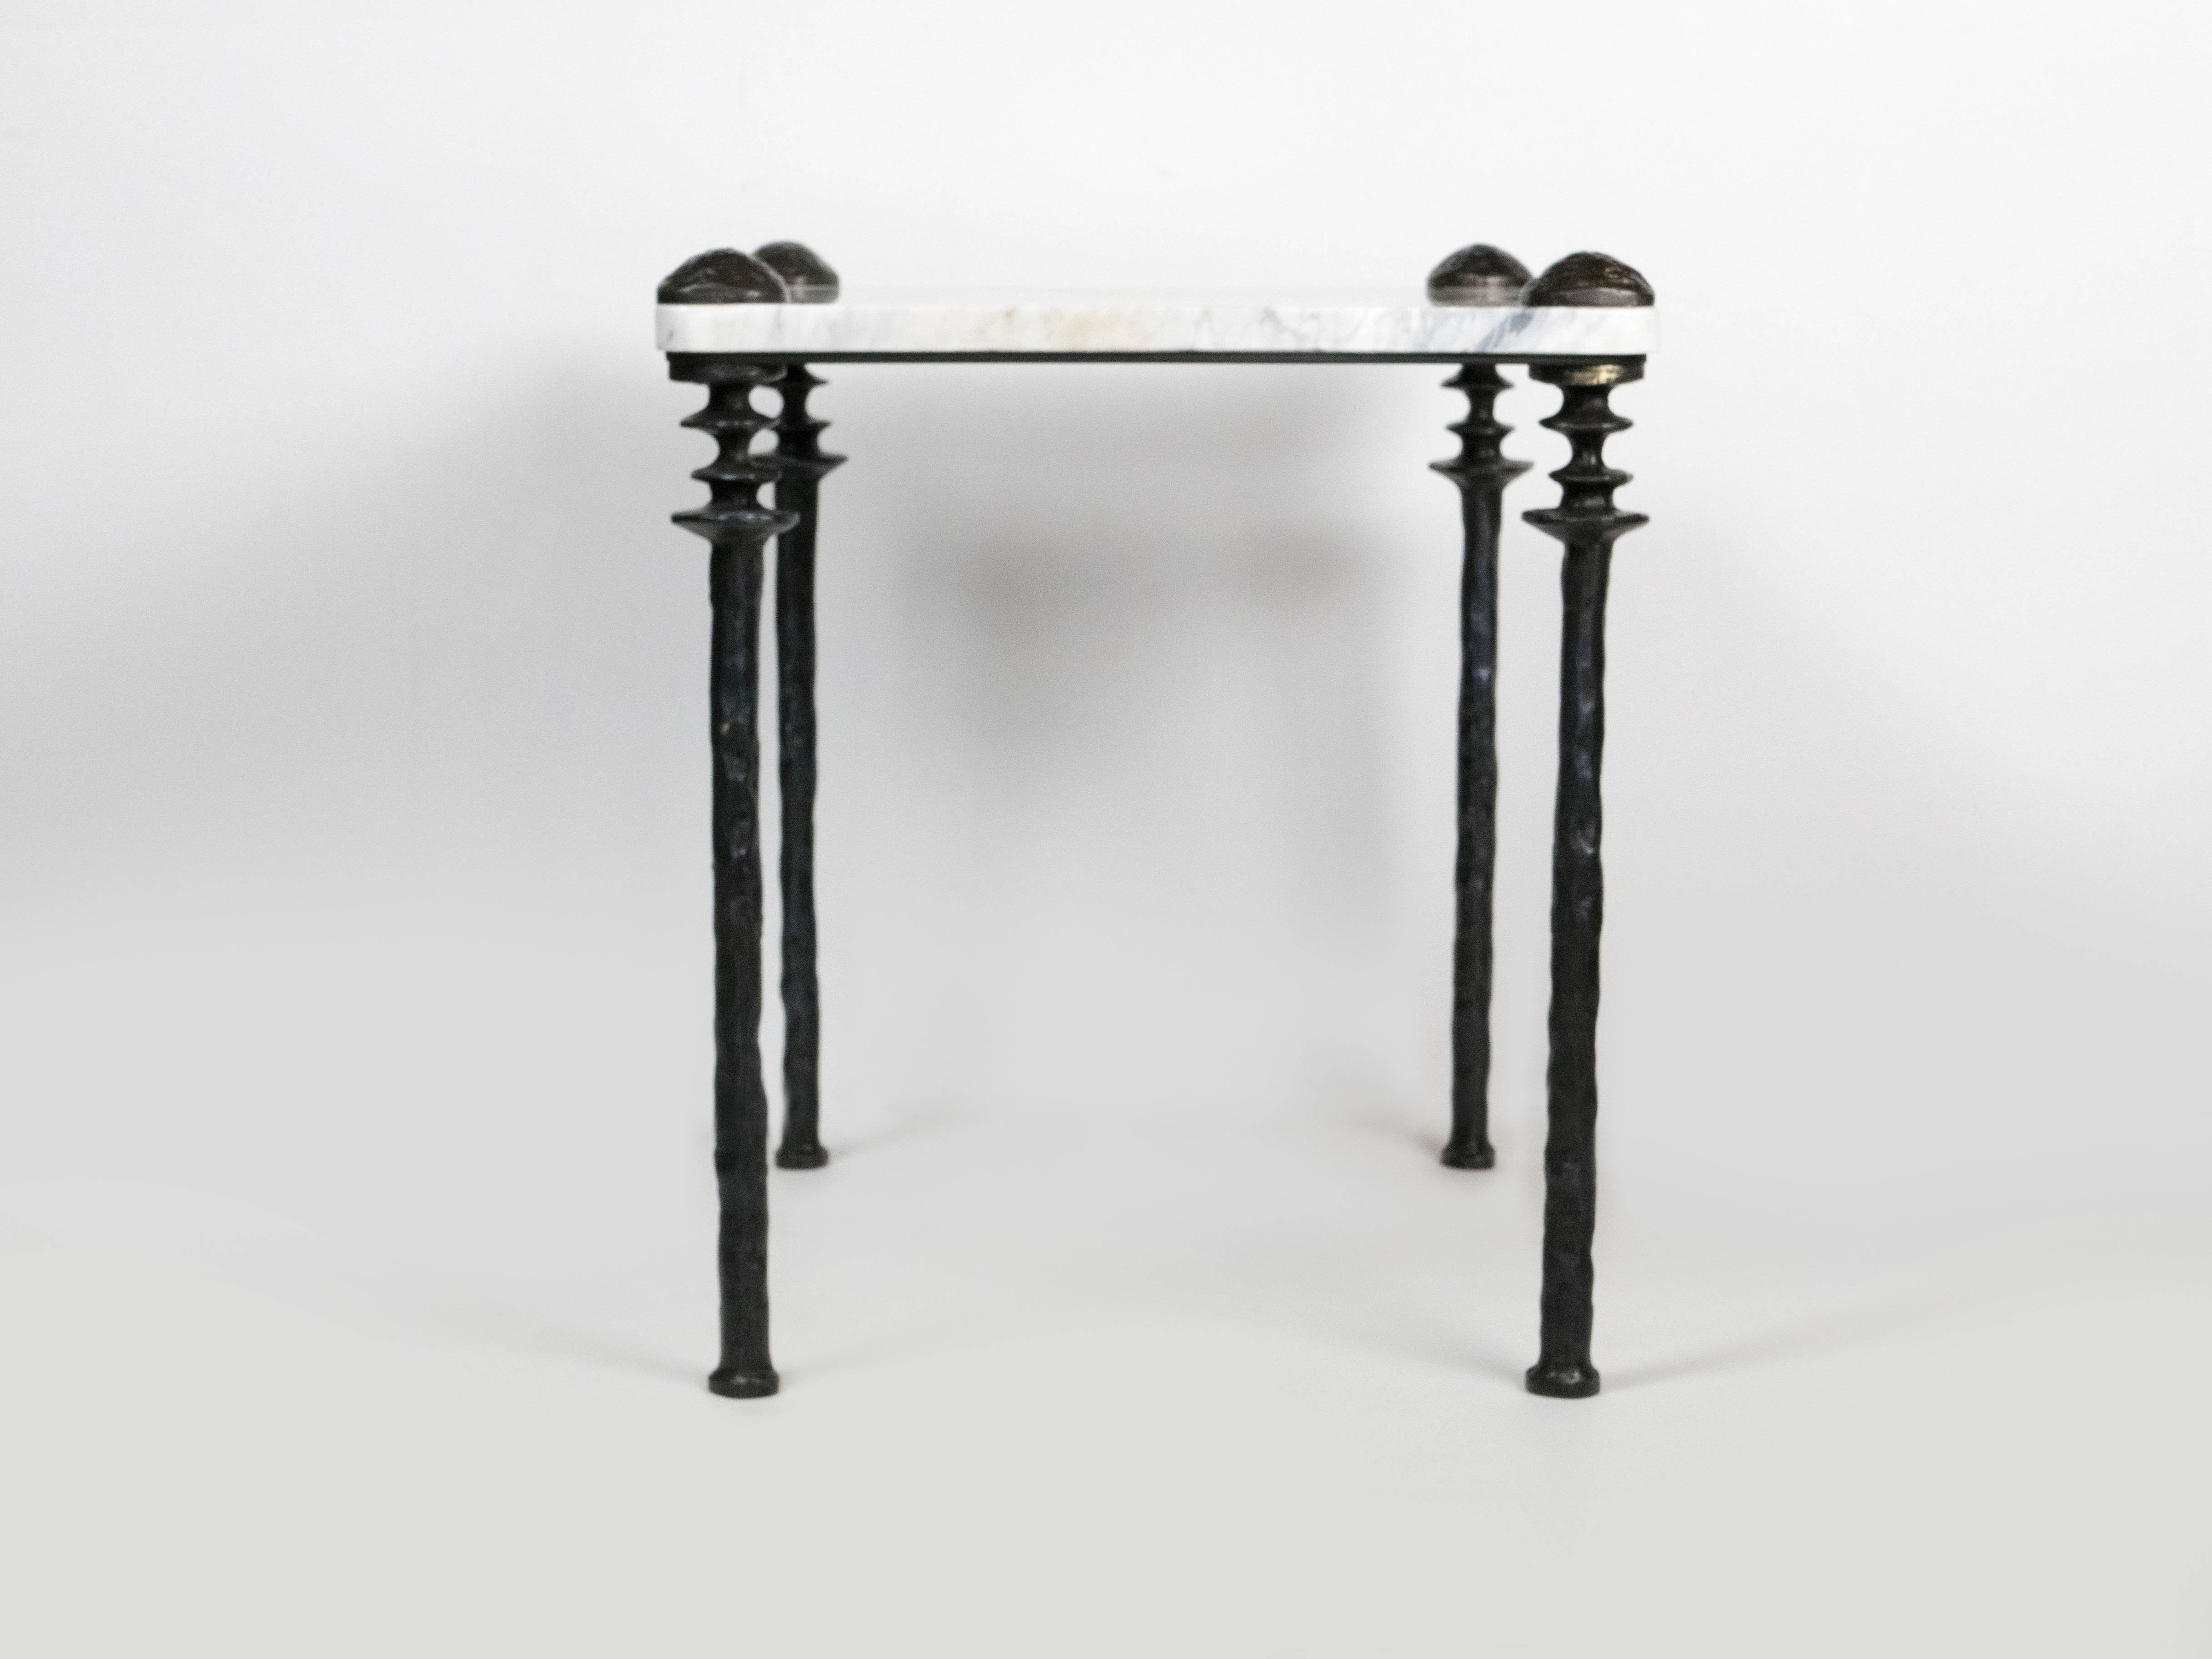 Two marble-topped small scaled side tables. The legs are cast bronze.  Unique organic texture of the bronze legs.  Three heights of legs are available.  Can be created with or without the decorative elements on the top of the marble.  
 